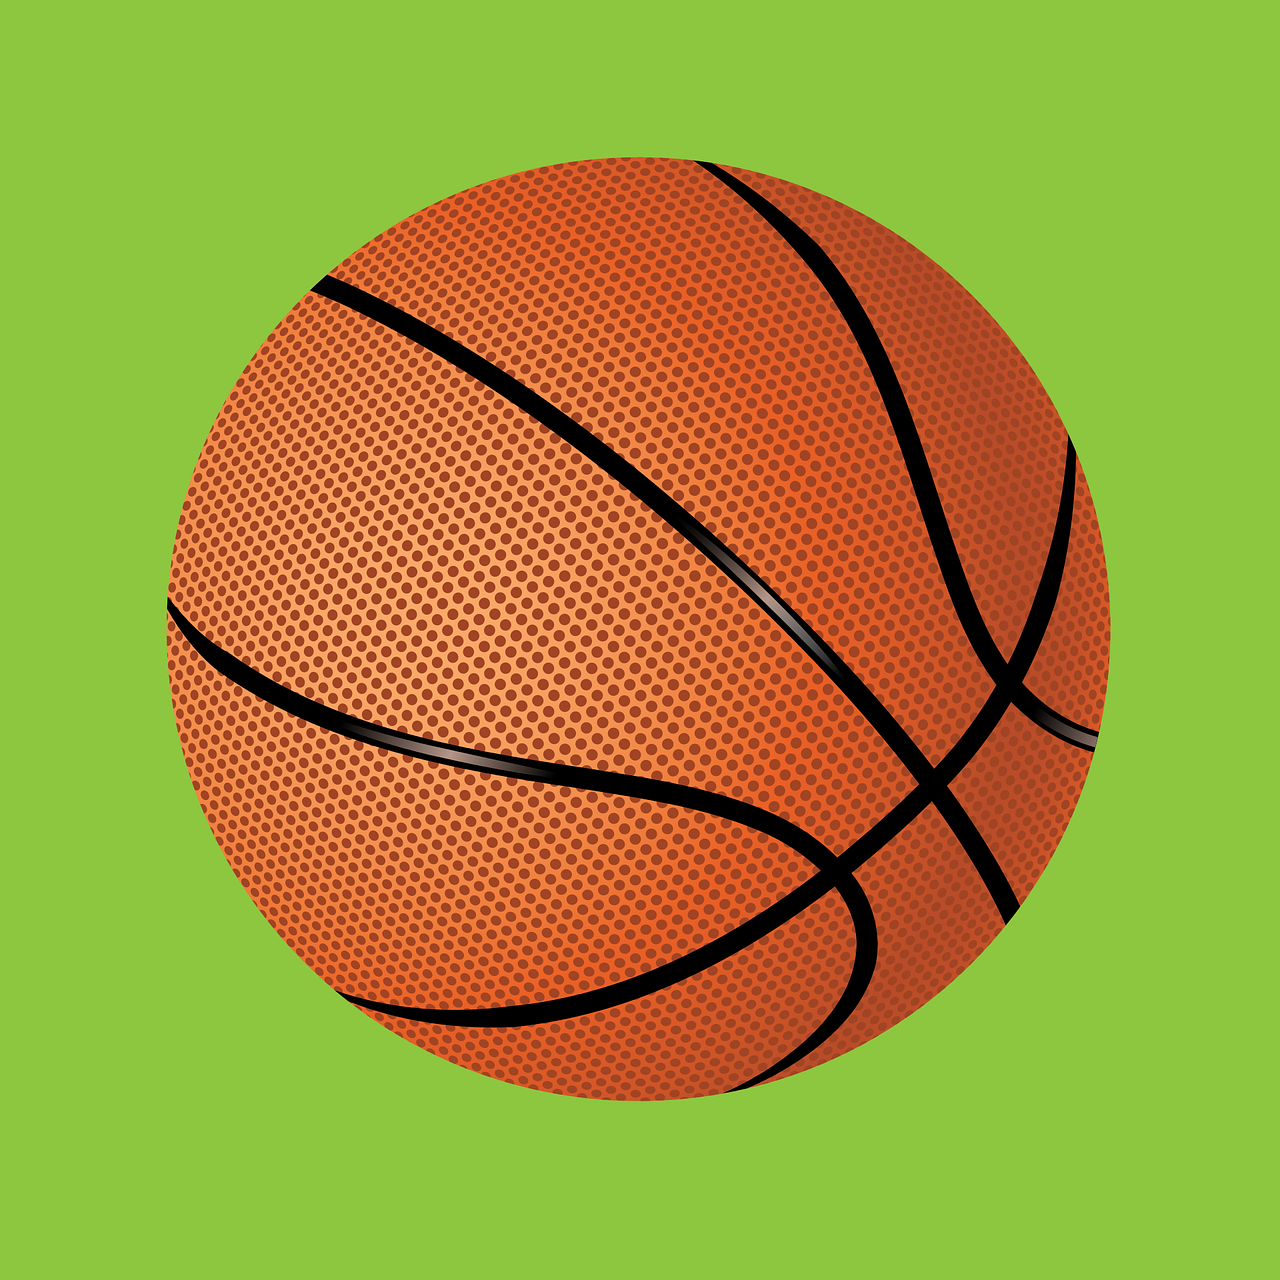 Basketball illustration. Open content image.